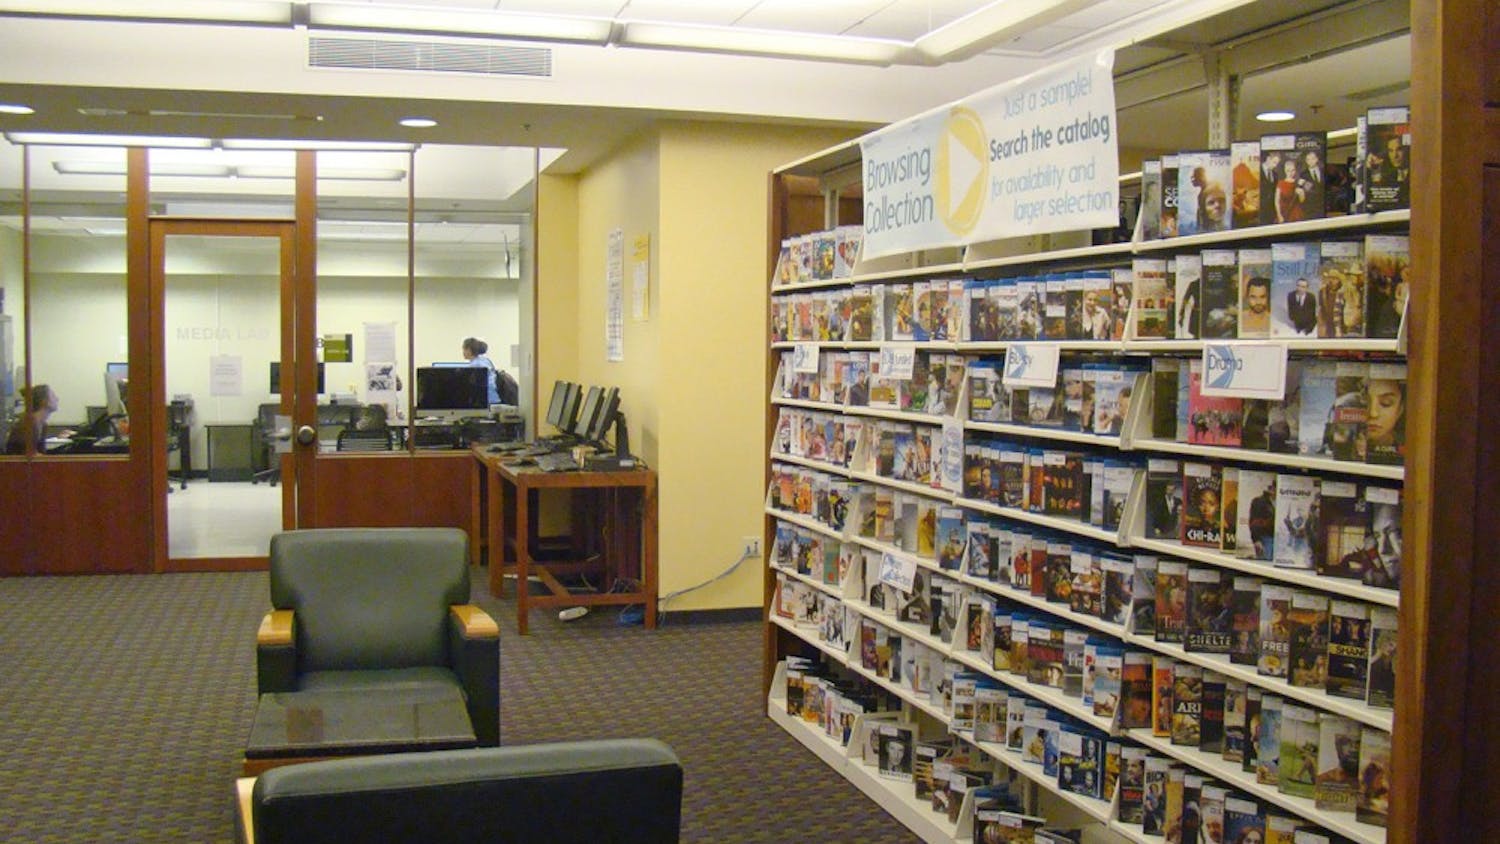 The Media Resource Center is located in the basement of the UL and is home to a plethora of fun resources including a media lab with advanced computers and editing software, a vast collection of movies, and a fleet of computers that serve as personal theaters.